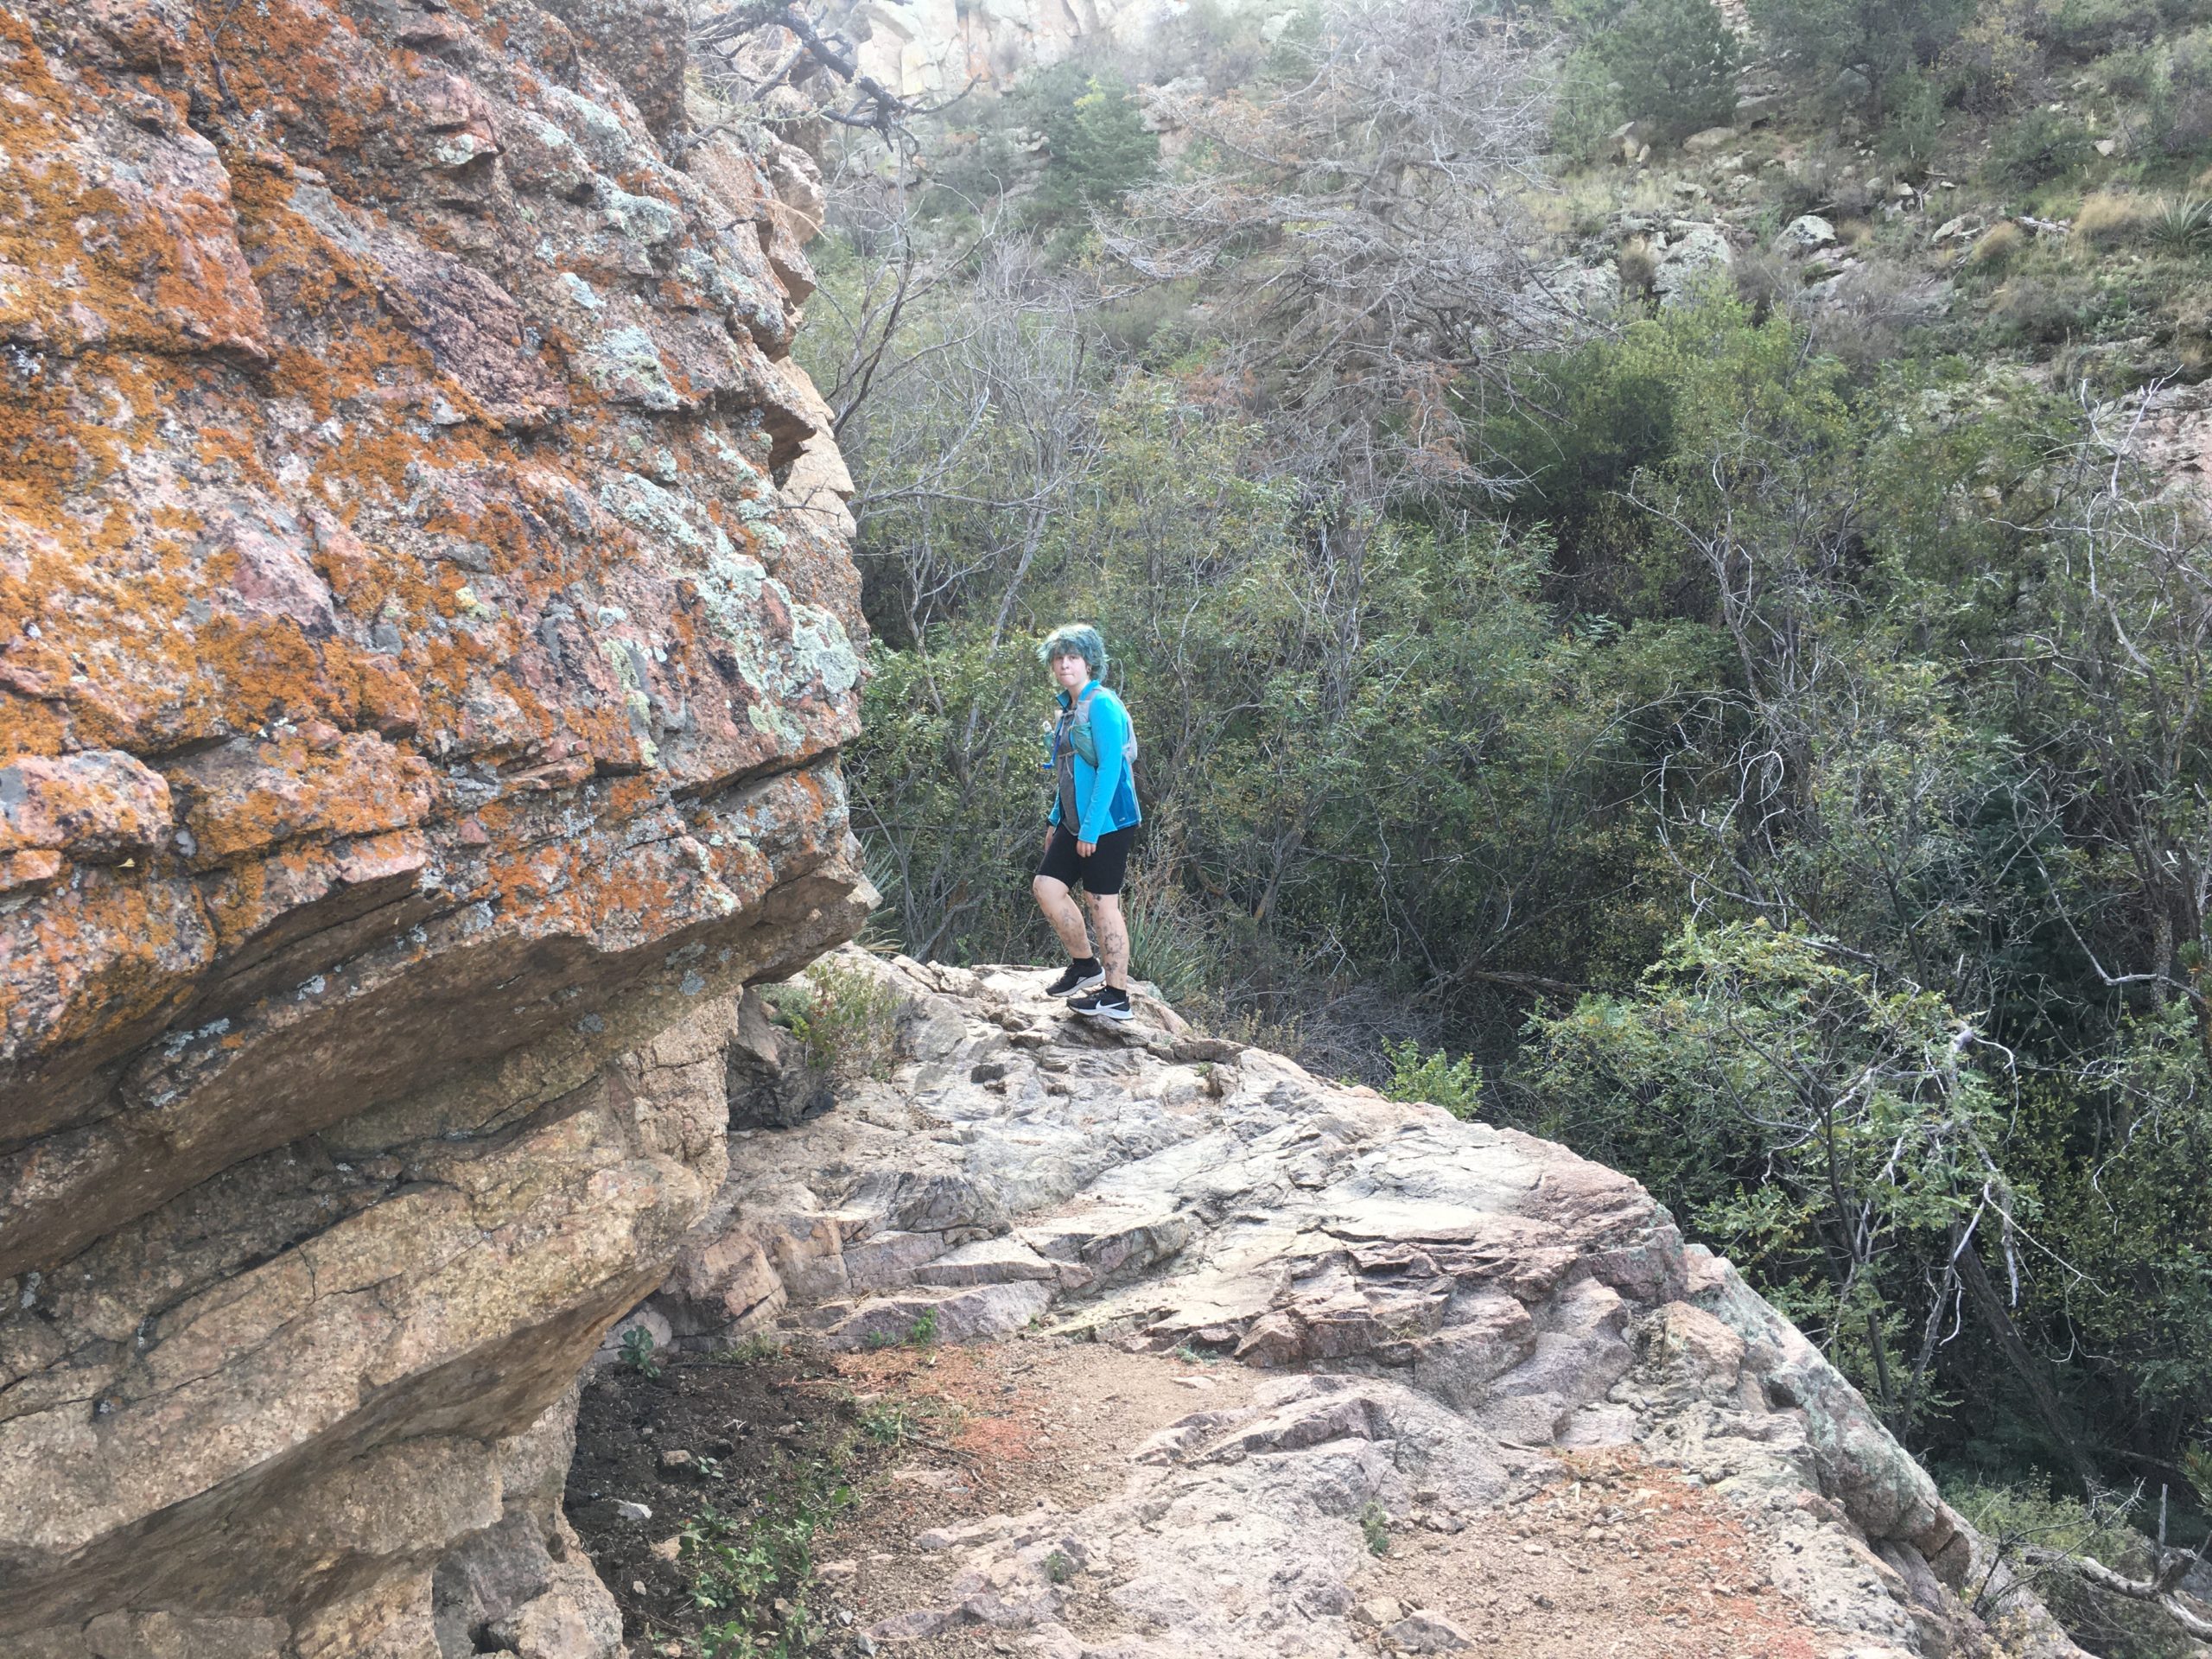 My daughter Grace on a rocky section of the trail